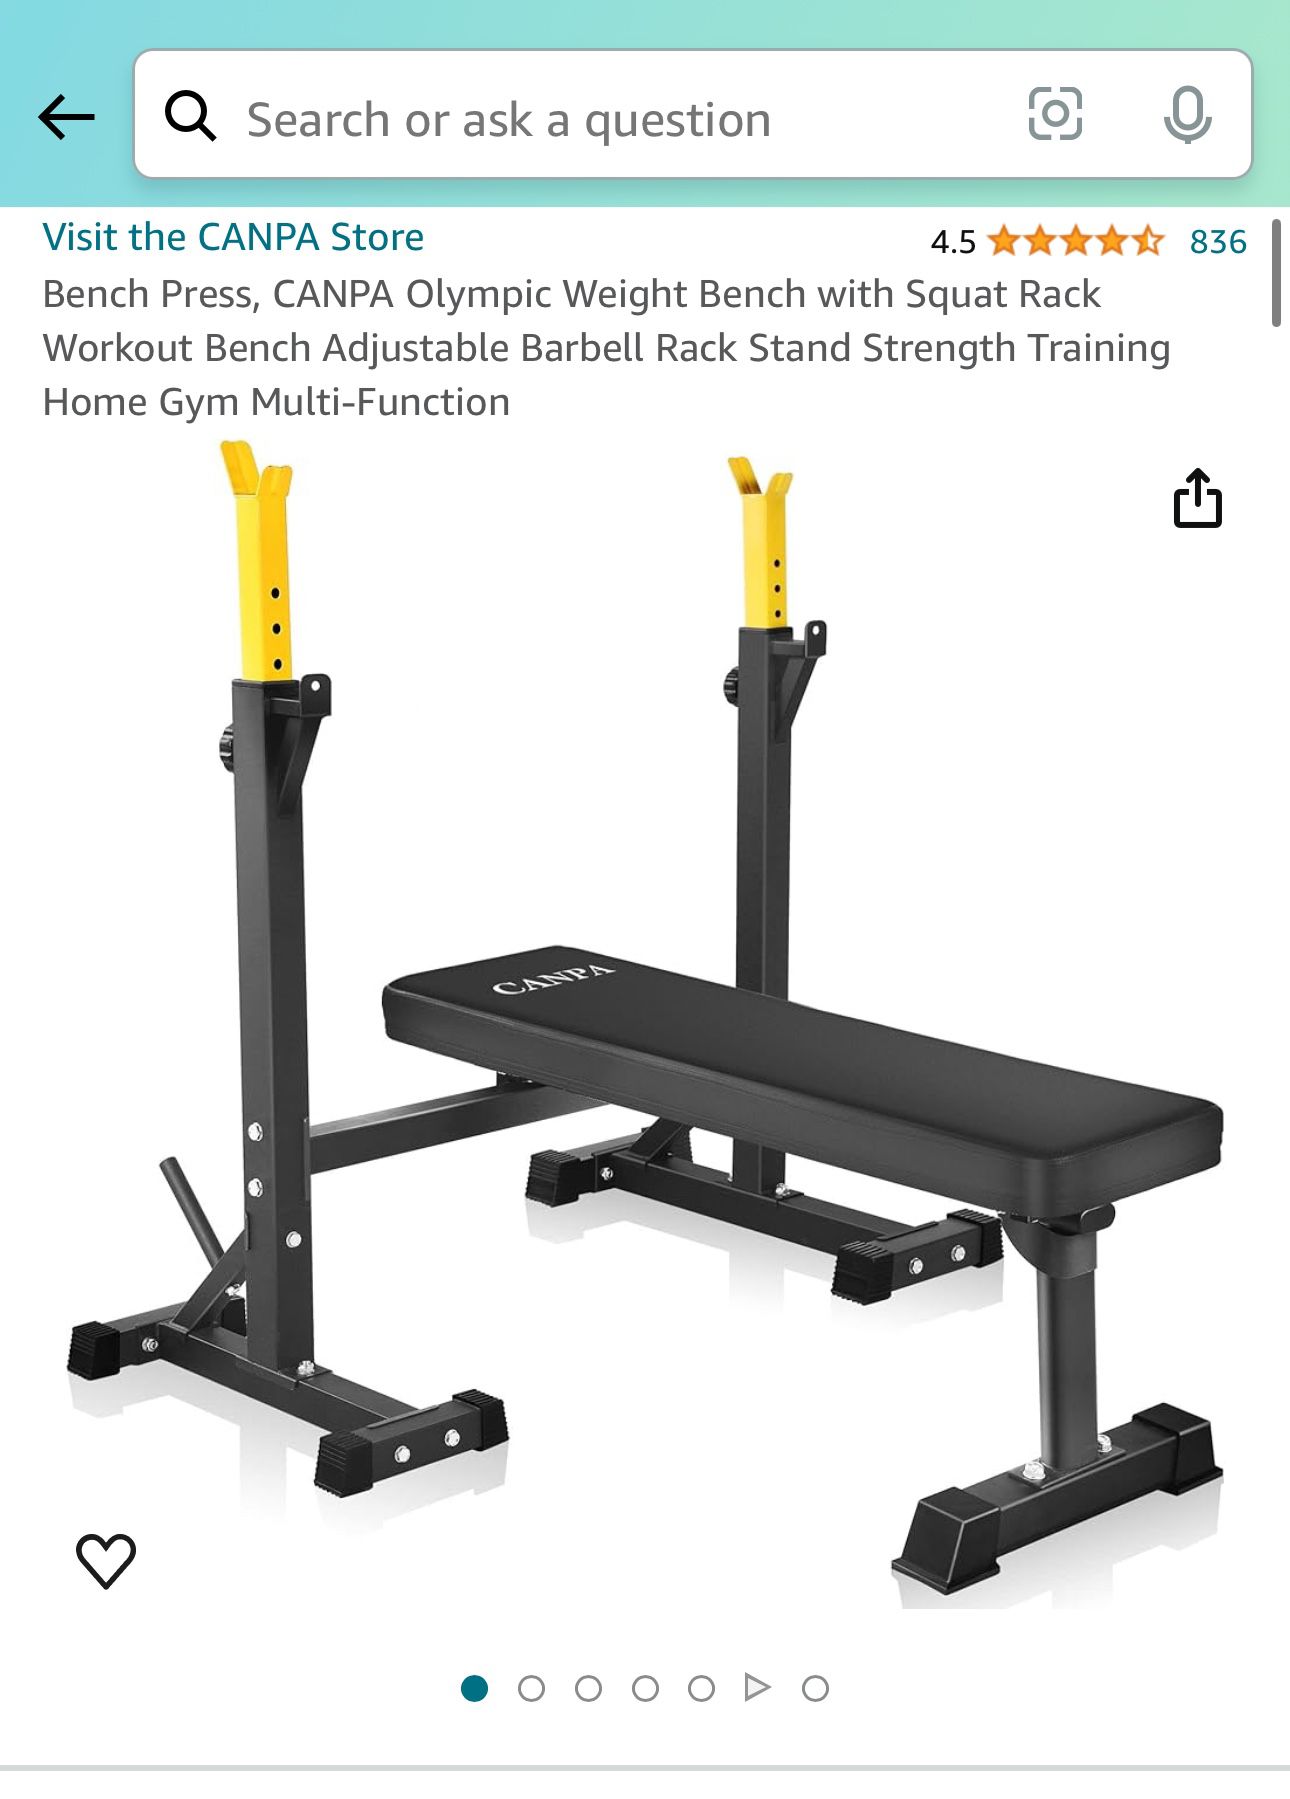 Bench Press, CANPA Olympic Weight Bench with Squat Rack Workout Bench Adjustable Barbell Rack Stand Strength Training Home Gym Multi-Function